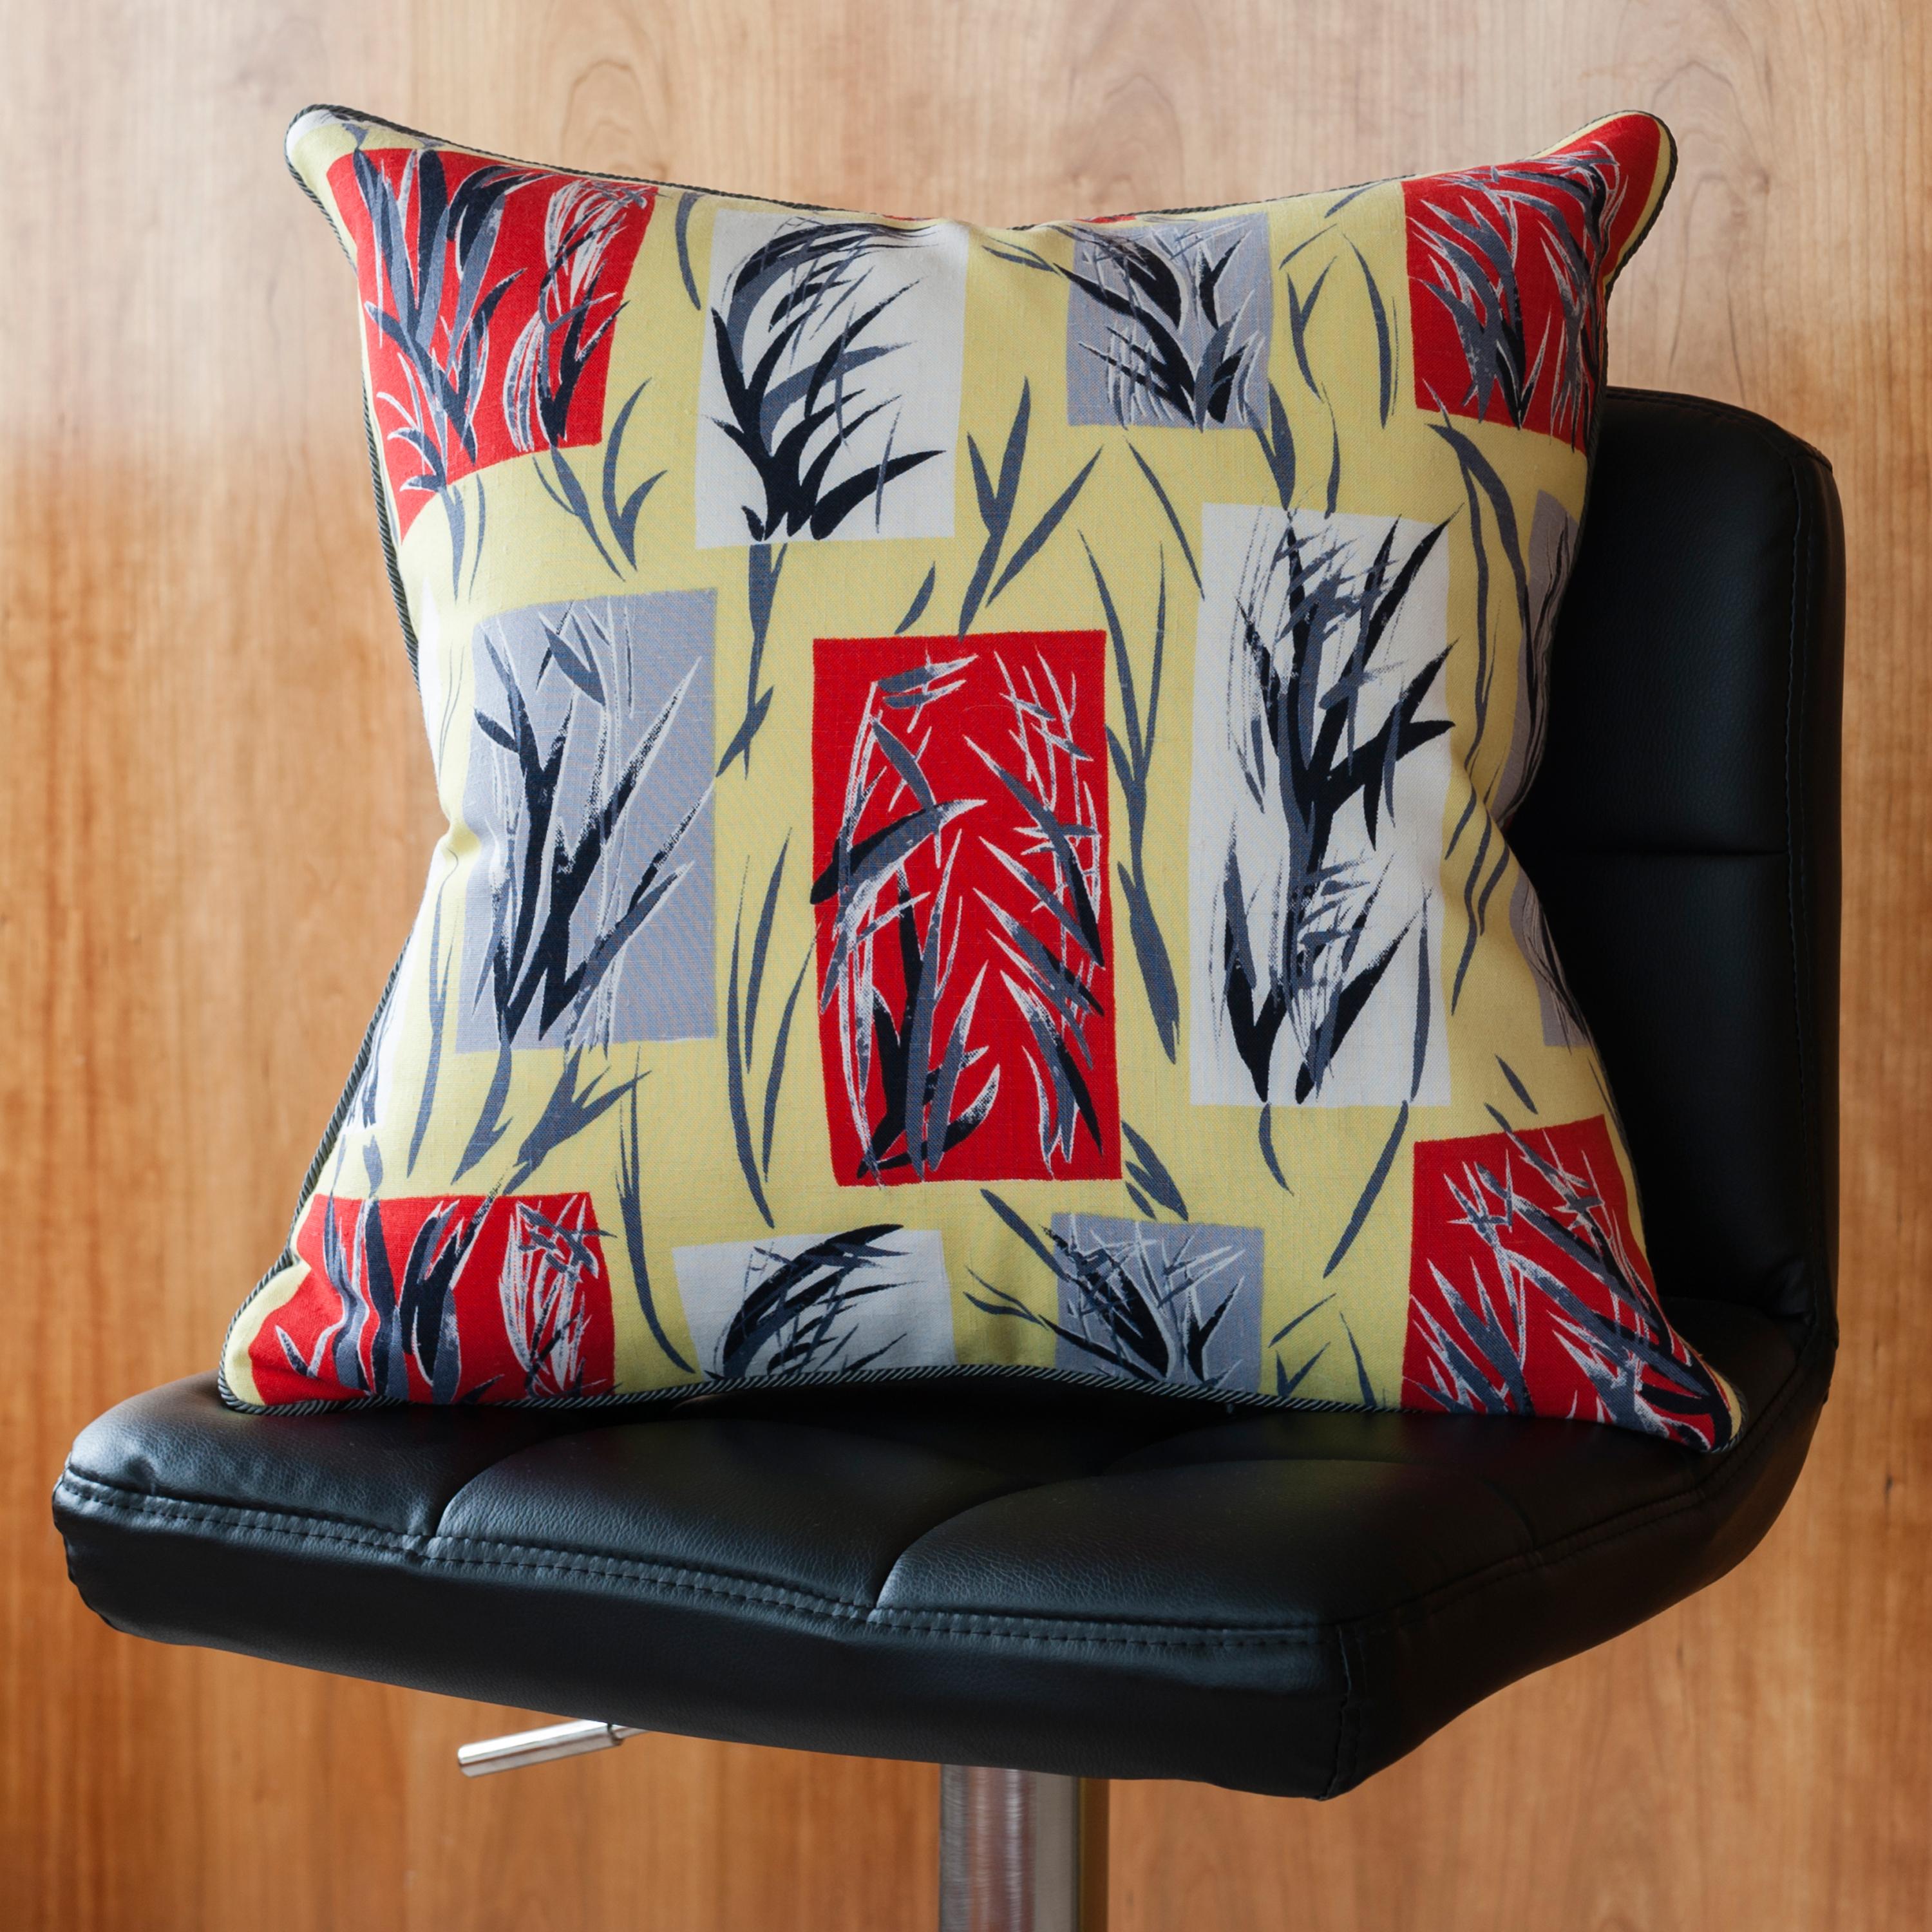 Hand-Crafted Vintage Cushions, Bespoke-Made Luxury Pillow, 'Bamboo Leaves', Made in UK